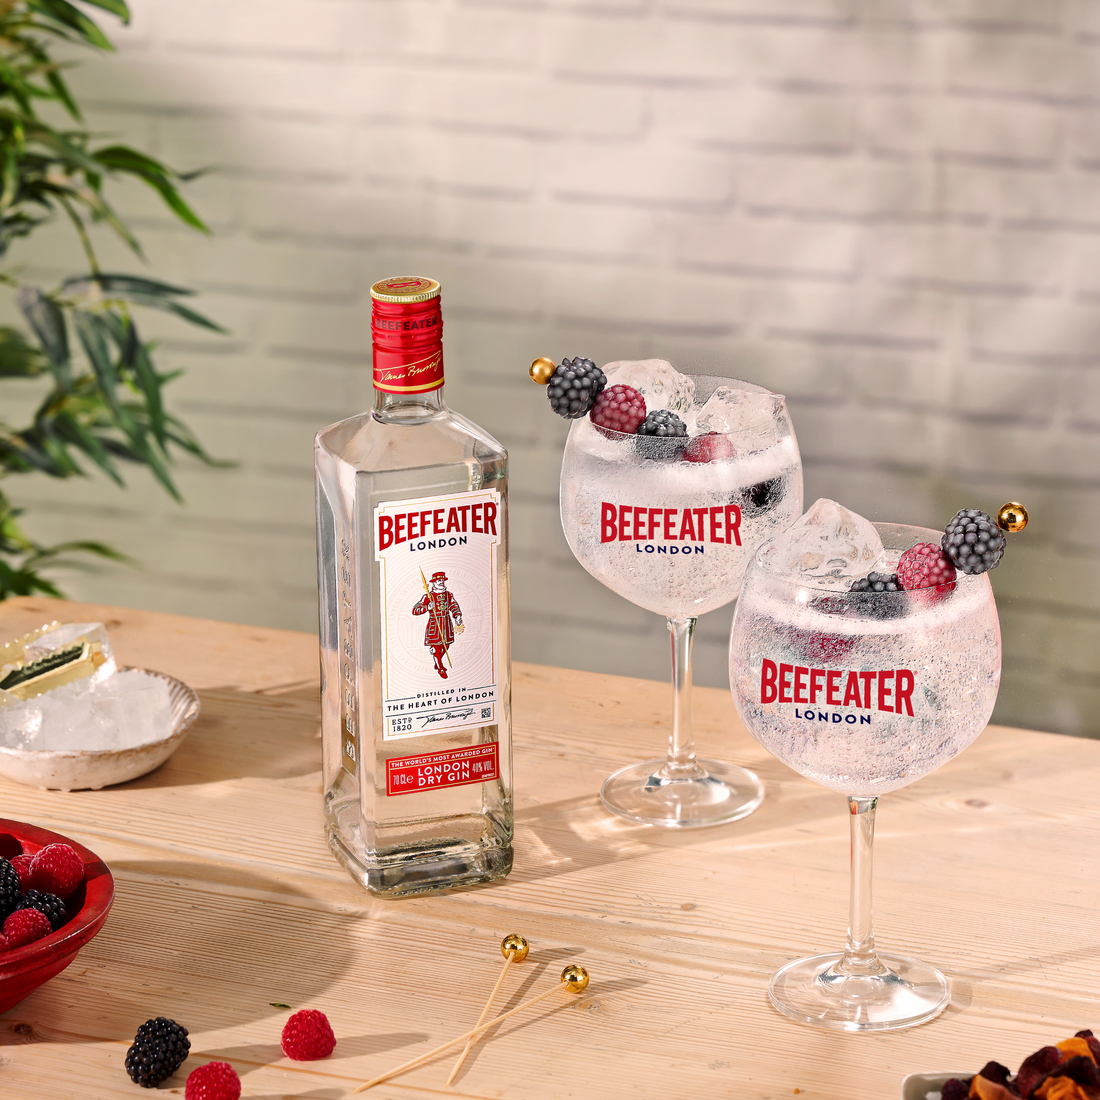 Beefeater London Dry Gin, 700mL